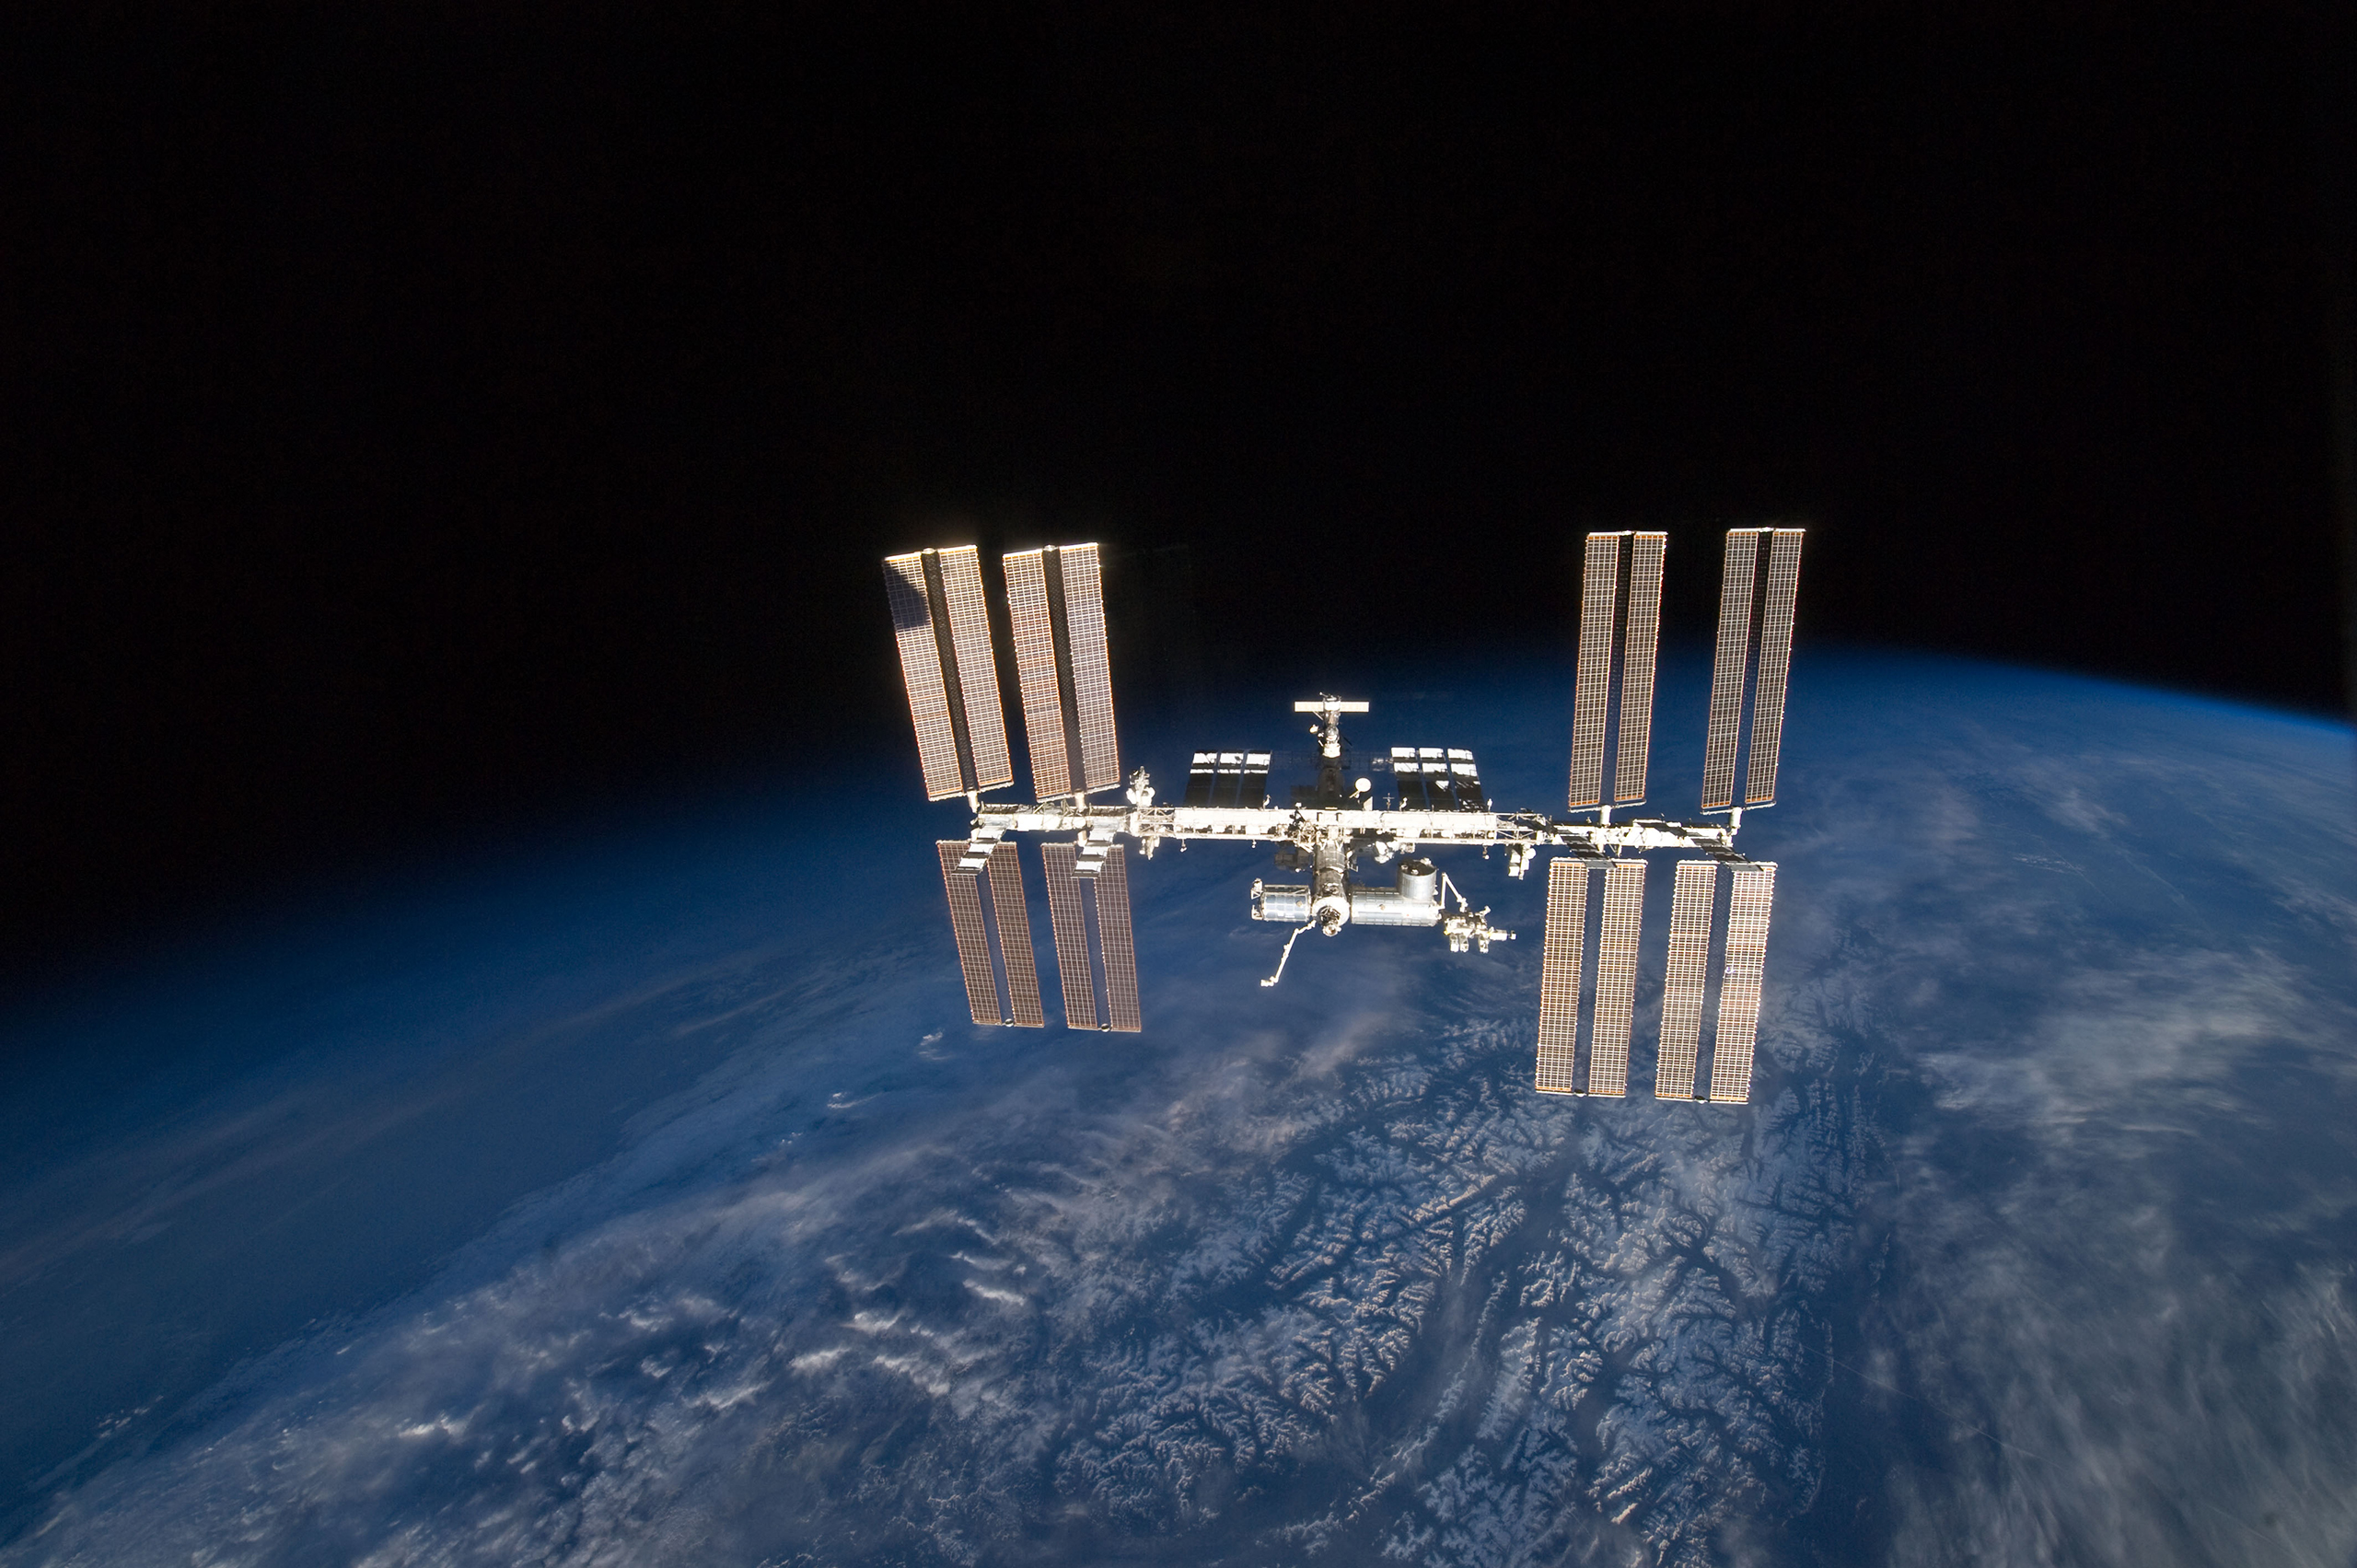 A photo showing view of the International Space Station in its entirety, with the curving blue, clouded surface of Earth below.